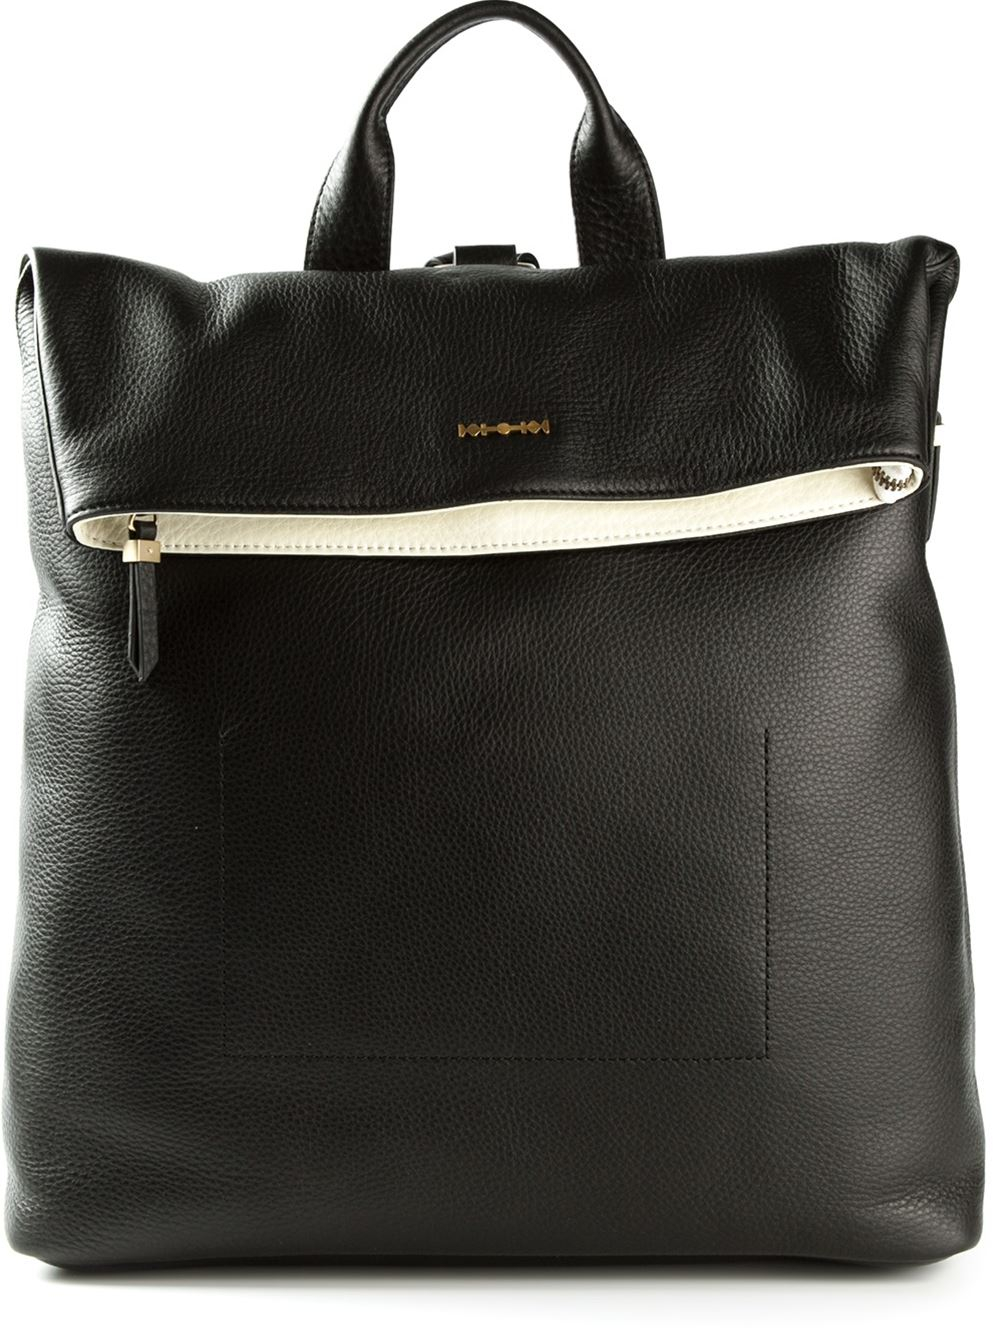 Lyst - Mcq Classic Backpack in Black